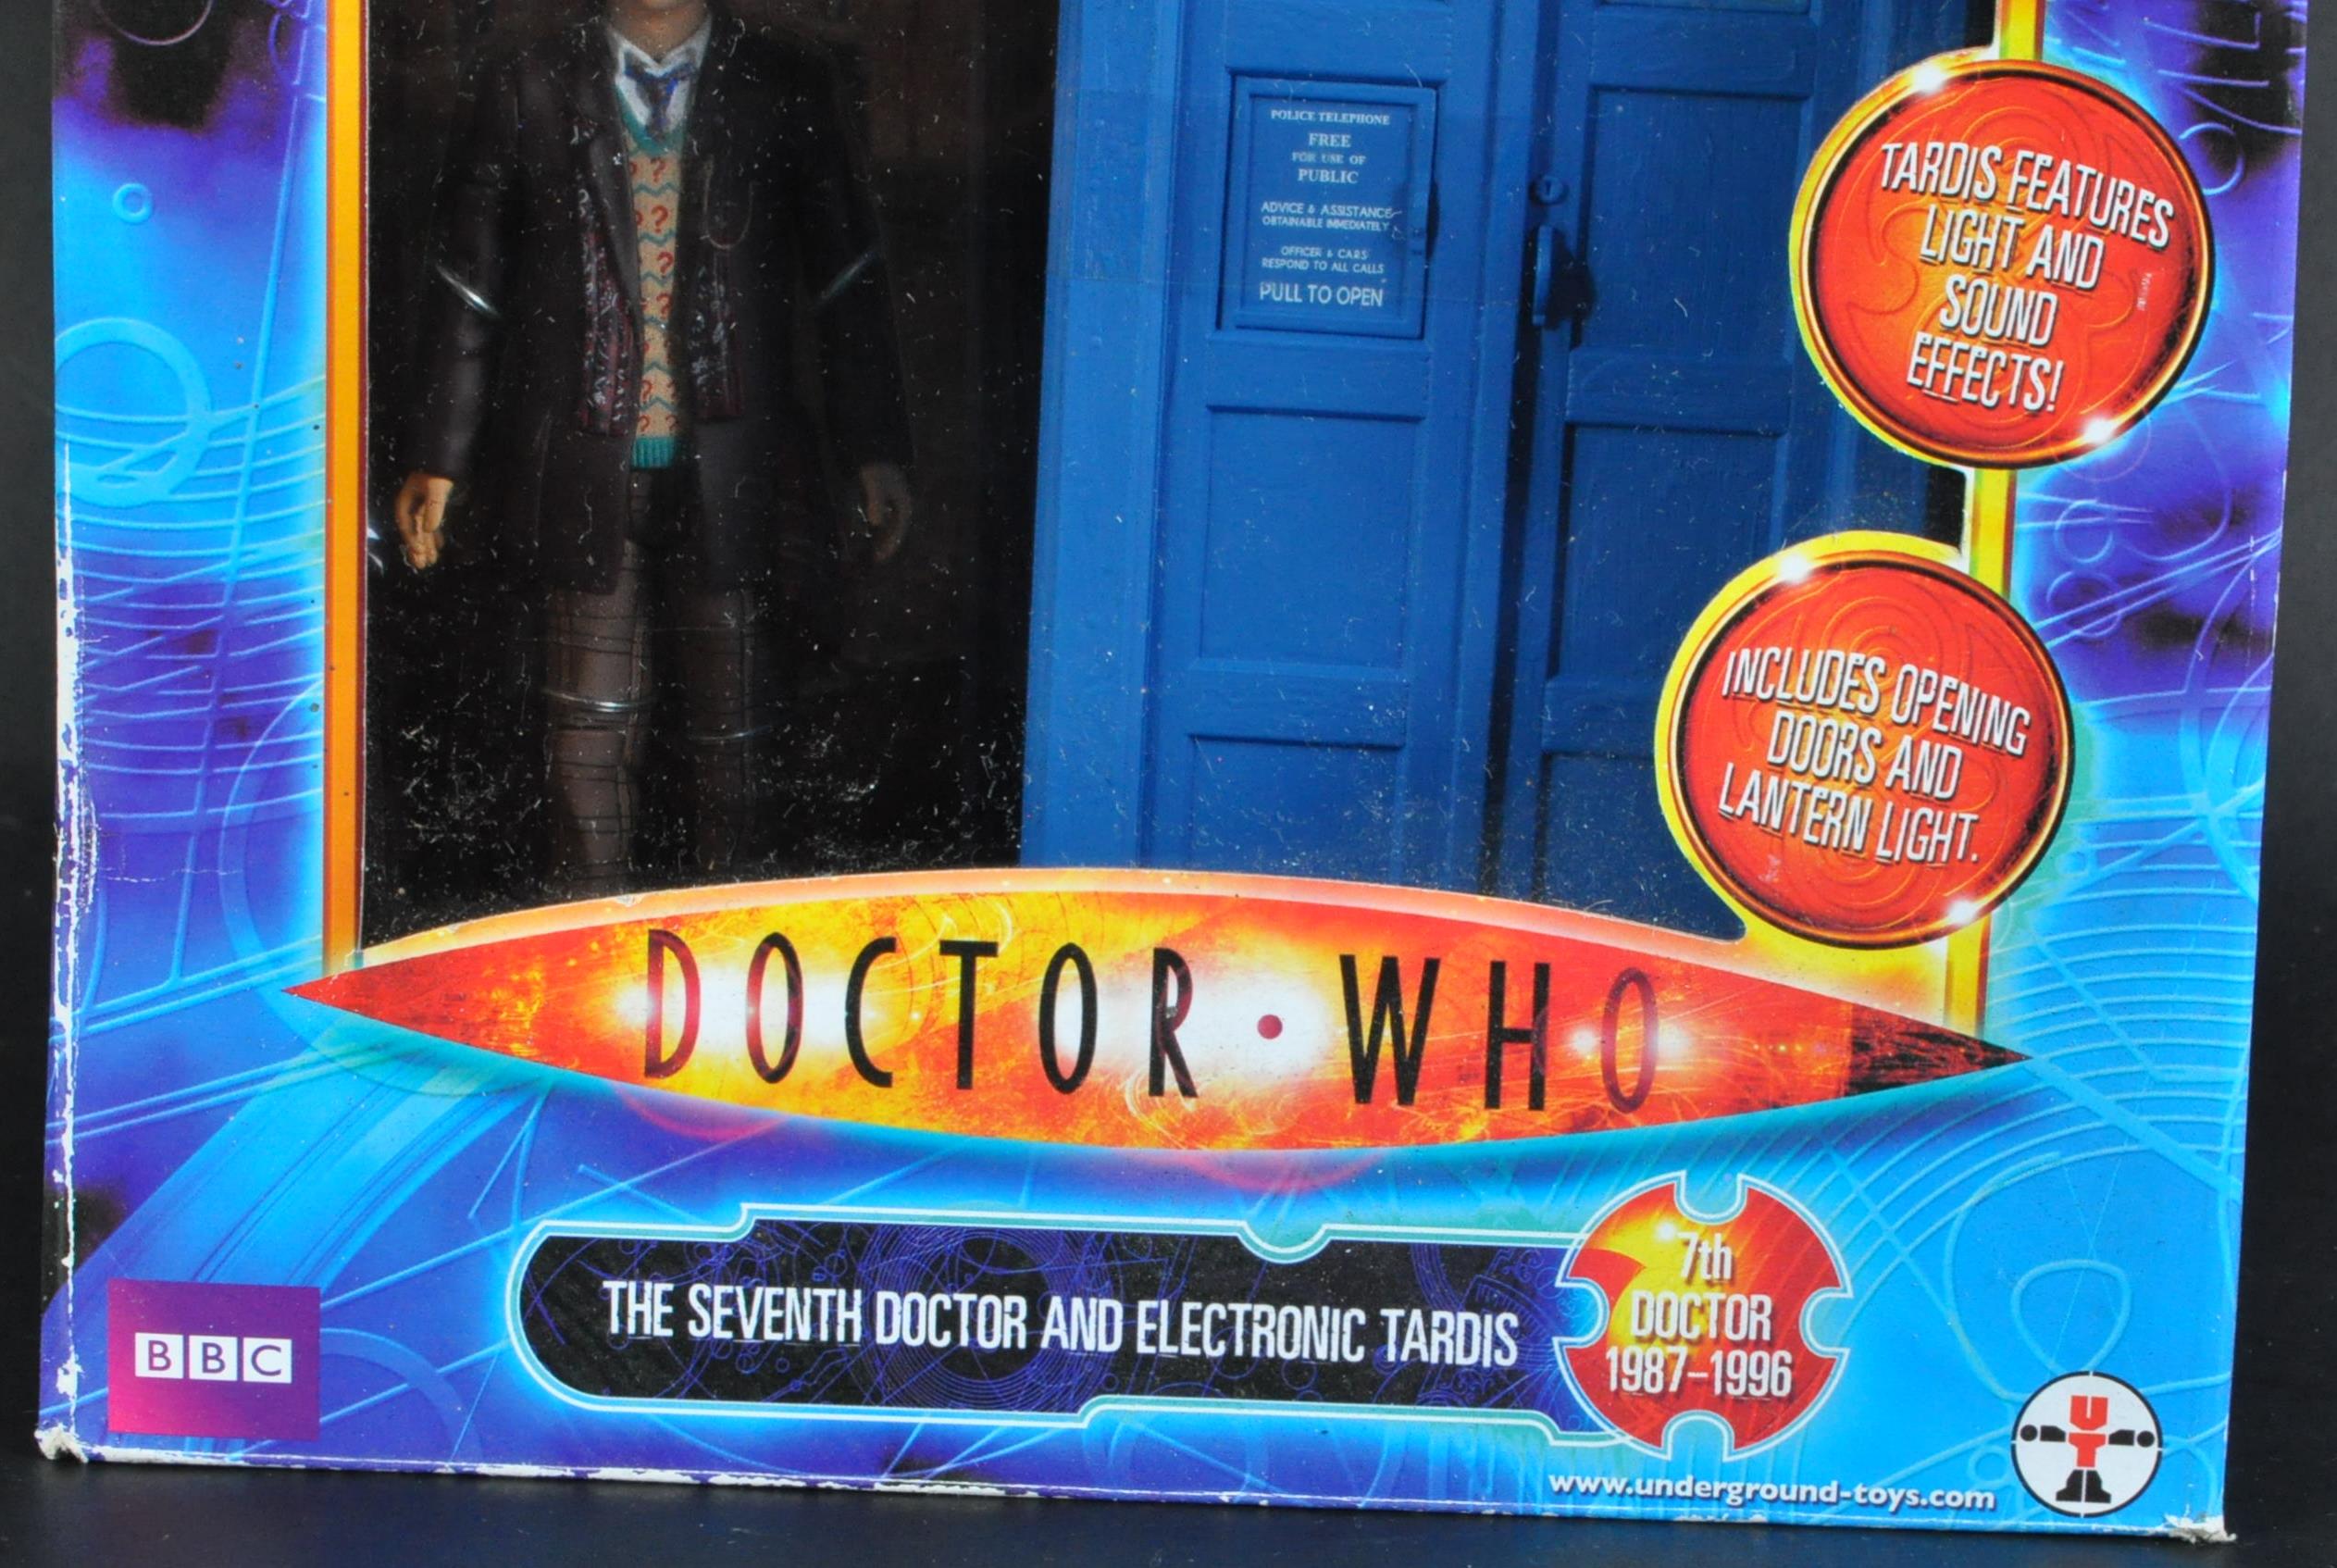 DOCTOR WHO - UNDERGROUND TOYS - SEVENTH DOCTOR ELECTRONIC TARDIS - Image 3 of 5